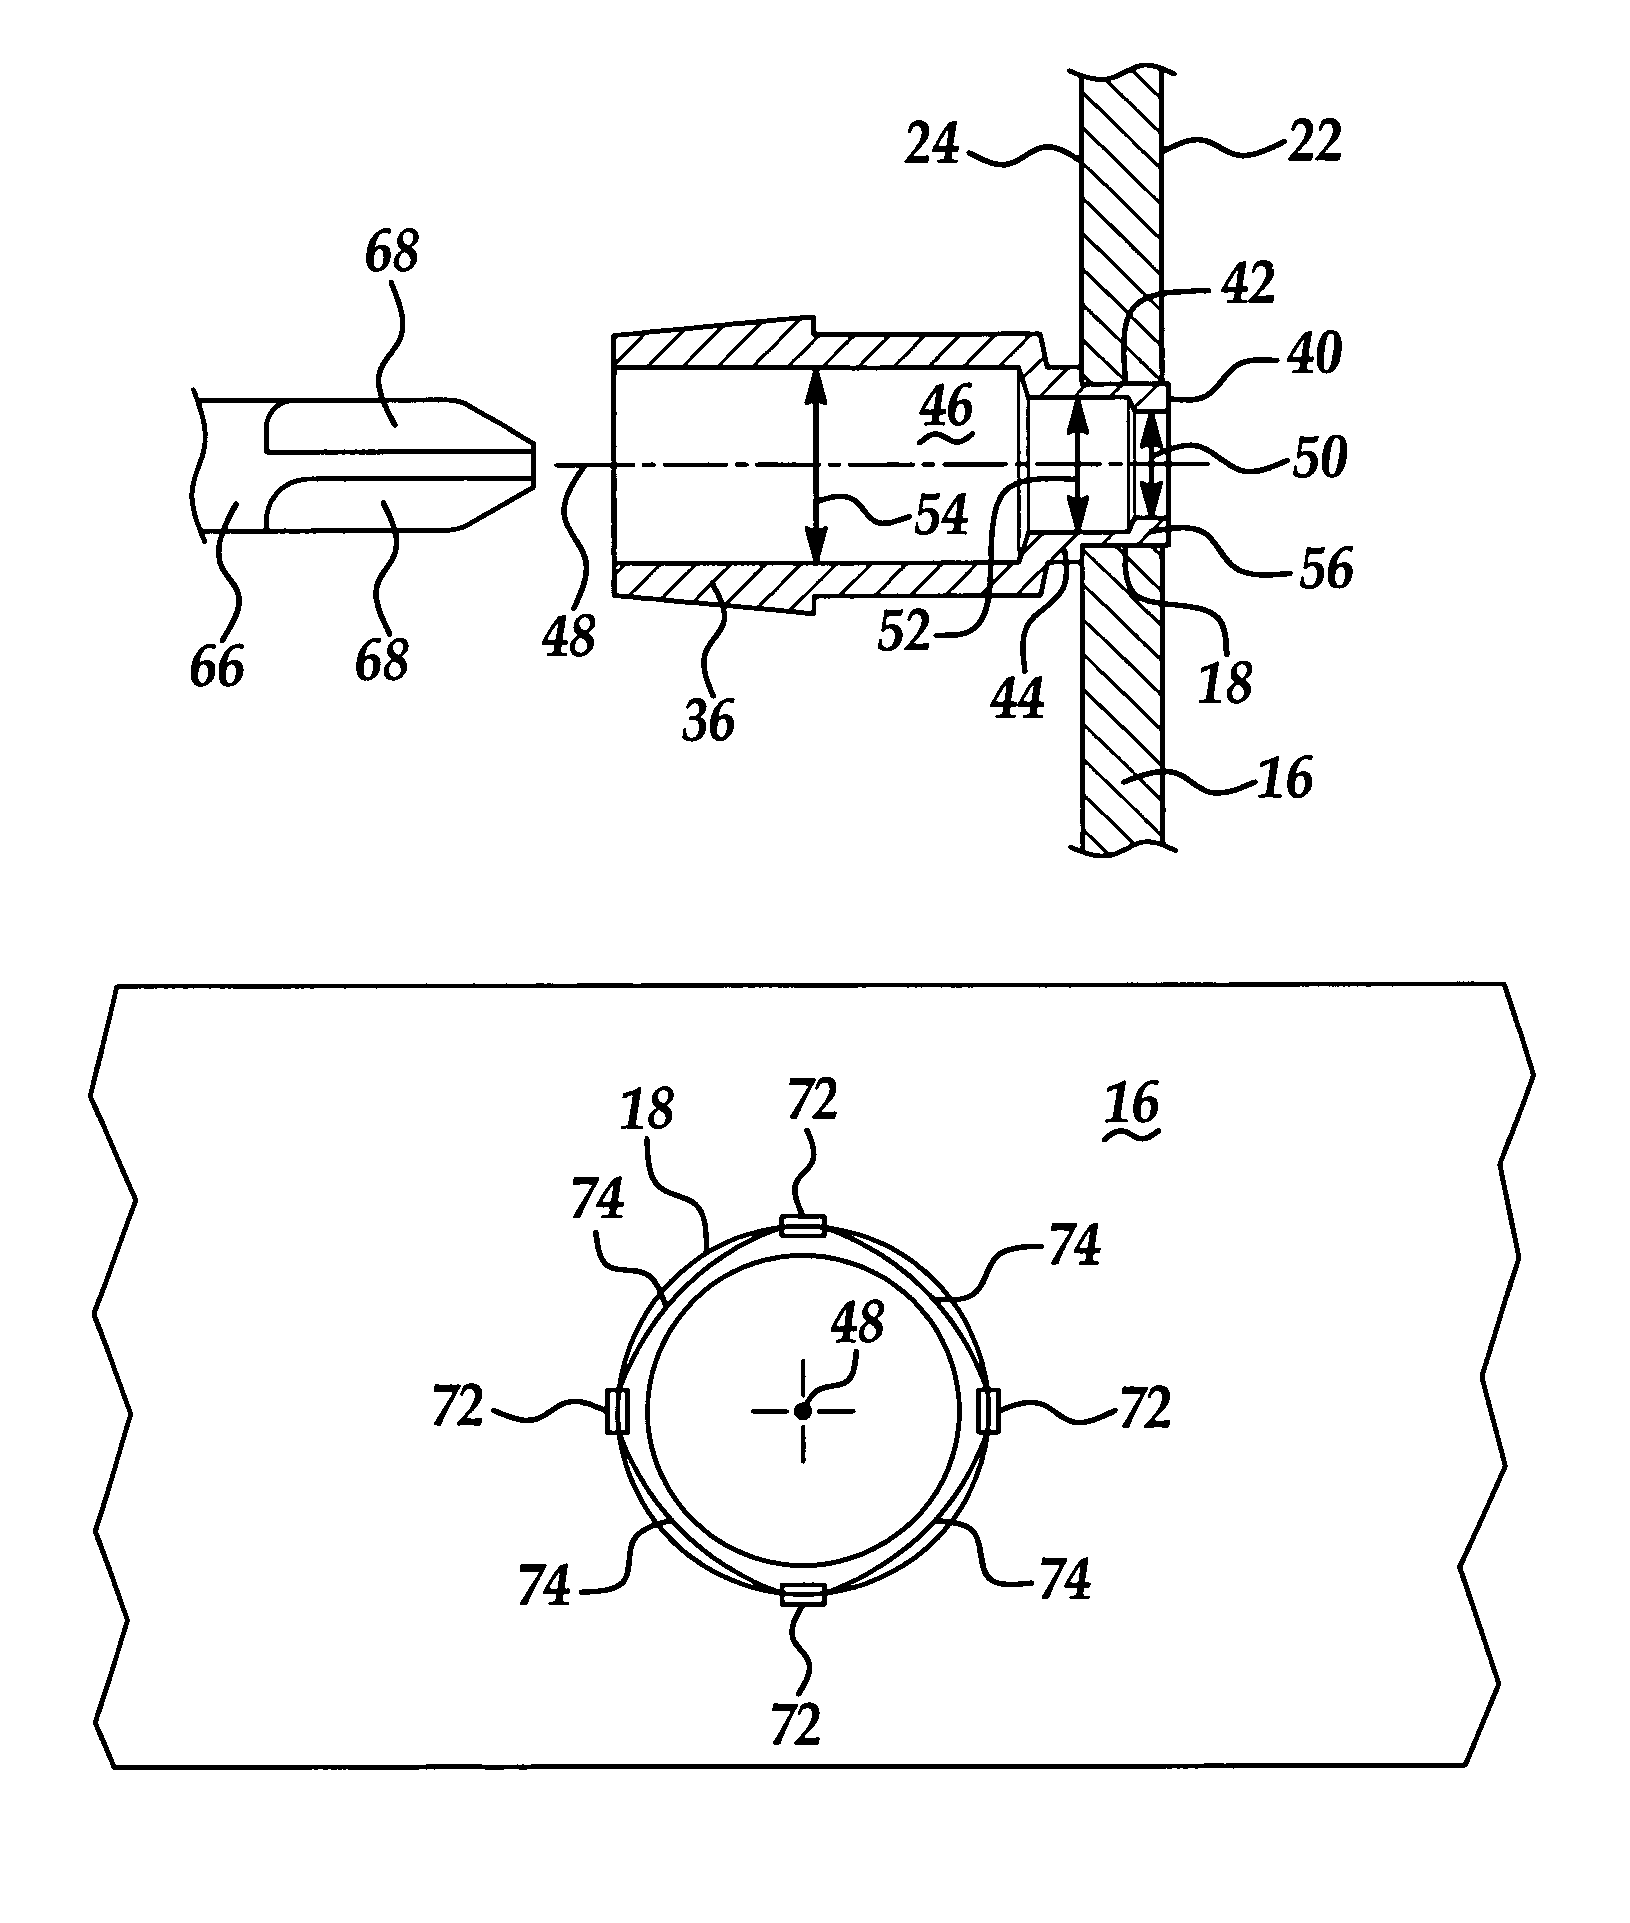 Heat exchanger assembly having fitting secured thereto and method of securing the same